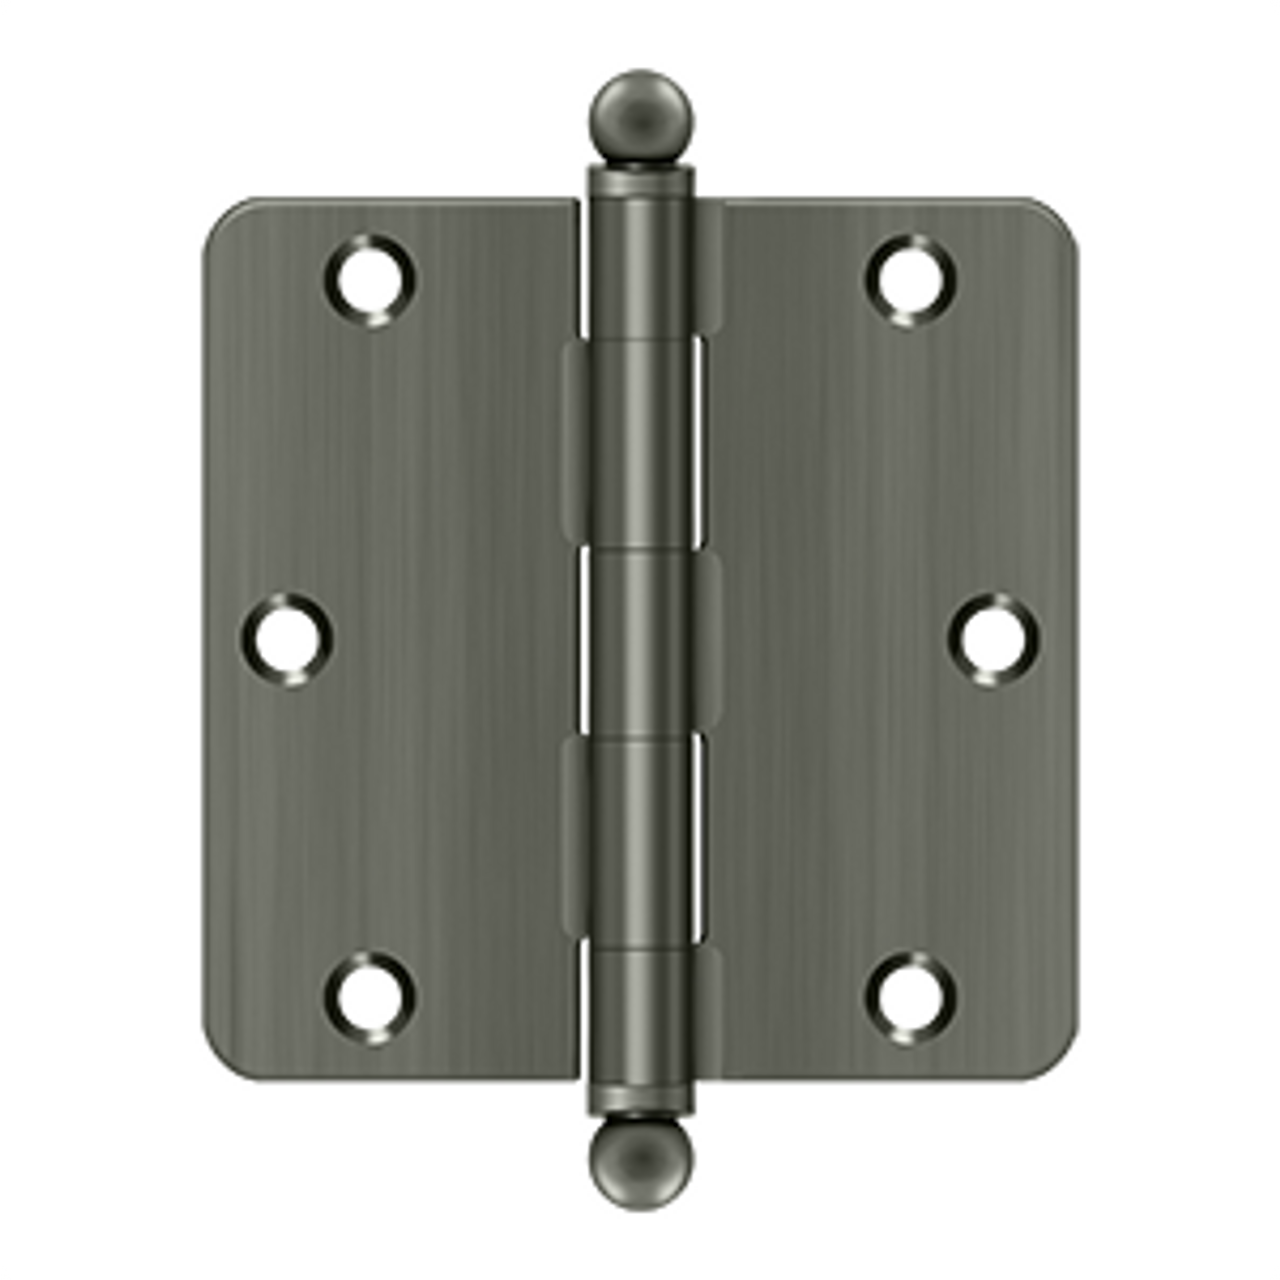 Deltana S35R4BT 3-1/2" X 3-1/2" X 1/4" RADIUS HINGE, WITH BALL TIPS,STEEL MATERIAL